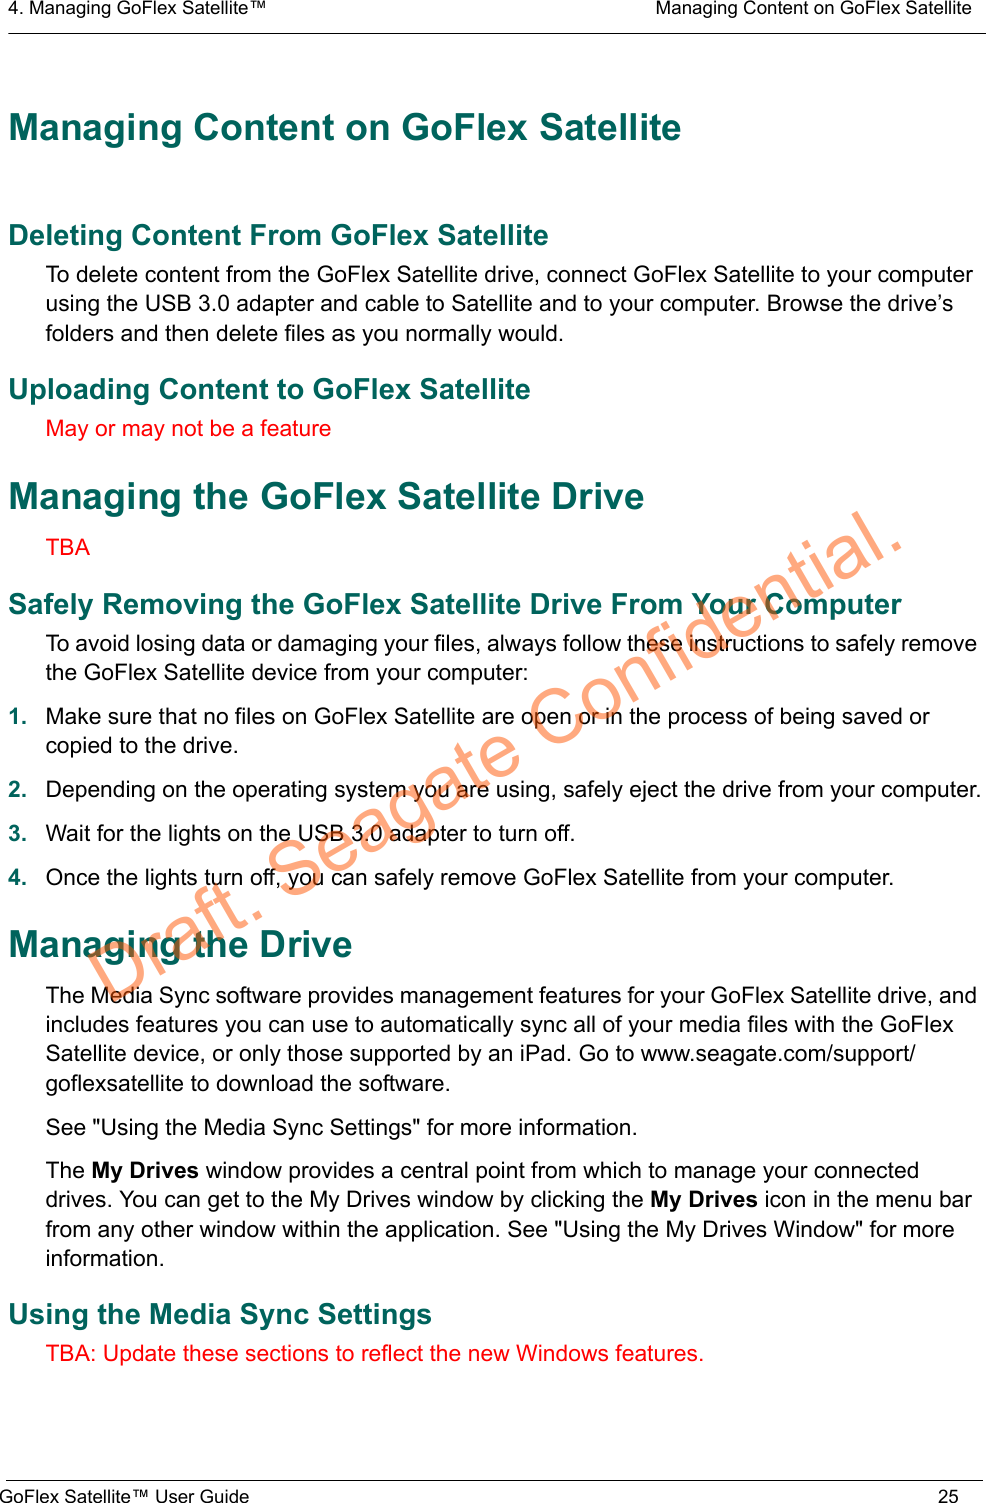 4. Managing GoFlex Satellite™  Managing Content on GoFlex SatelliteGoFlex Satellite™ User Guide 25Managing Content on GoFlex SatelliteDeleting Content From GoFlex SatelliteTo delete content from the GoFlex Satellite drive, connect GoFlex Satellite to your computer using the USB 3.0 adapter and cable to Satellite and to your computer. Browse the drive’s folders and then delete files as you normally would.Uploading Content to GoFlex SatelliteMay or may not be a featureManaging the GoFlex Satellite DriveTBASafely Removing the GoFlex Satellite Drive From Your ComputerTo avoid losing data or damaging your files, always follow these instructions to safely remove the GoFlex Satellite device from your computer:1. Make sure that no files on GoFlex Satellite are open or in the process of being saved or copied to the drive.2. Depending on the operating system you are using, safely eject the drive from your computer.3. Wait for the lights on the USB 3.0 adapter to turn off.4. Once the lights turn off, you can safely remove GoFlex Satellite from your computer.Managing the DriveThe Media Sync software provides management features for your GoFlex Satellite drive, and includes features you can use to automatically sync all of your media files with the GoFlex Satellite device, or only those supported by an iPad. Go to www.seagate.com/support/goflexsatellite to download the software.See &quot;Using the Media Sync Settings&quot; for more information.The My Drives window provides a central point from which to manage your connected drives. You can get to the My Drives window by clicking the My Drives icon in the menu bar from any other window within the application. See &quot;Using the My Drives Window&quot; for more information.Using the Media Sync SettingsTBA: Update these sections to reflect the new Windows features.Draft. Seagate Confidential.